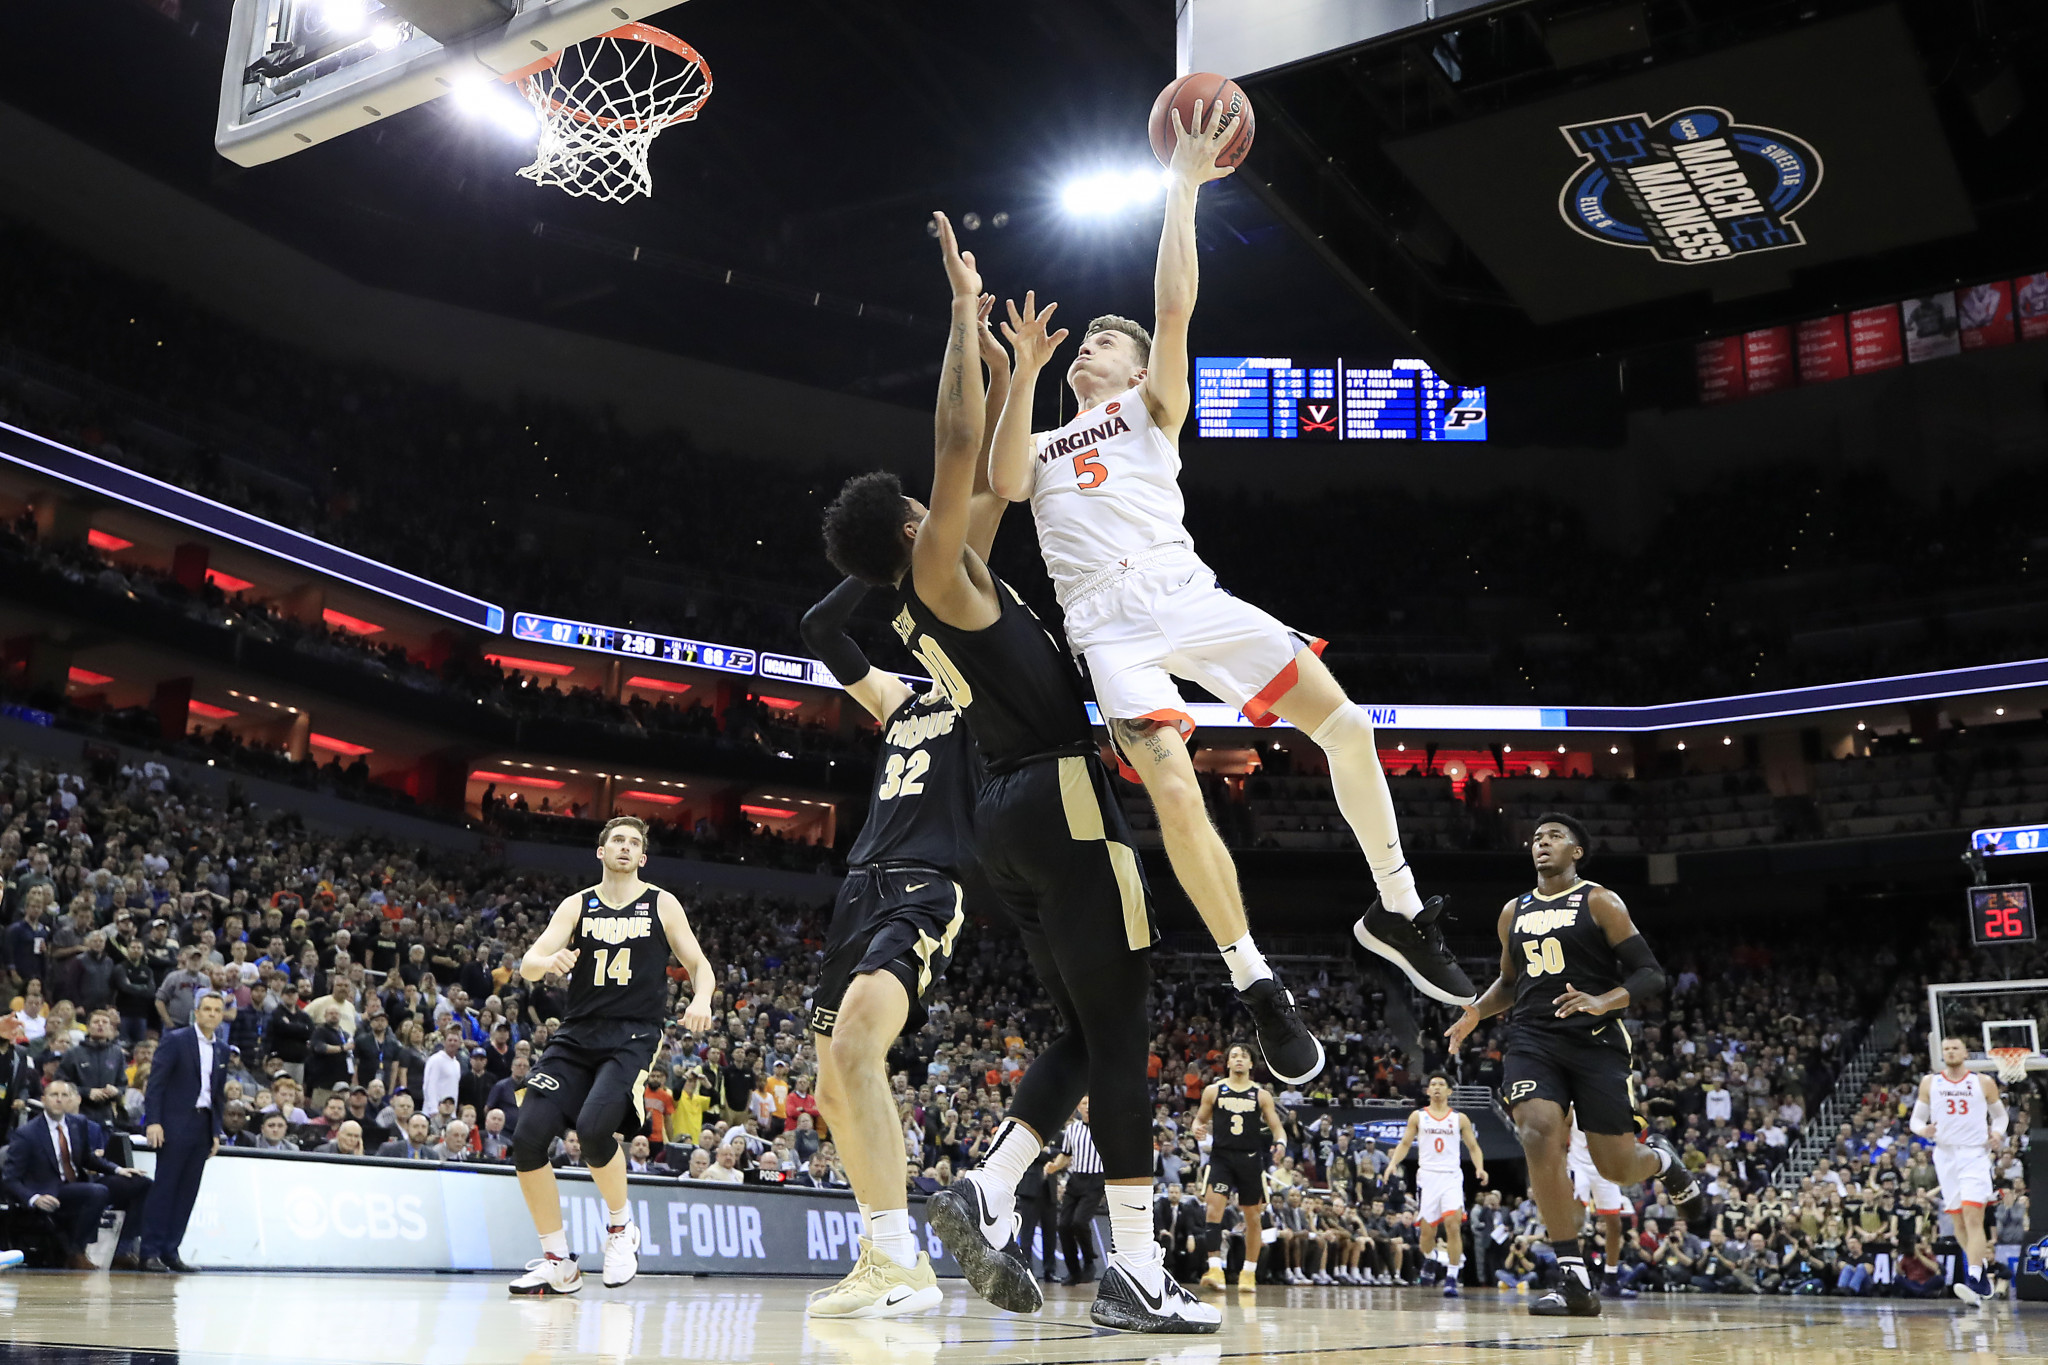 Virginia defeated to Texas Tech to win the title in 2019 when the March Madness was last staged ©Getty Images